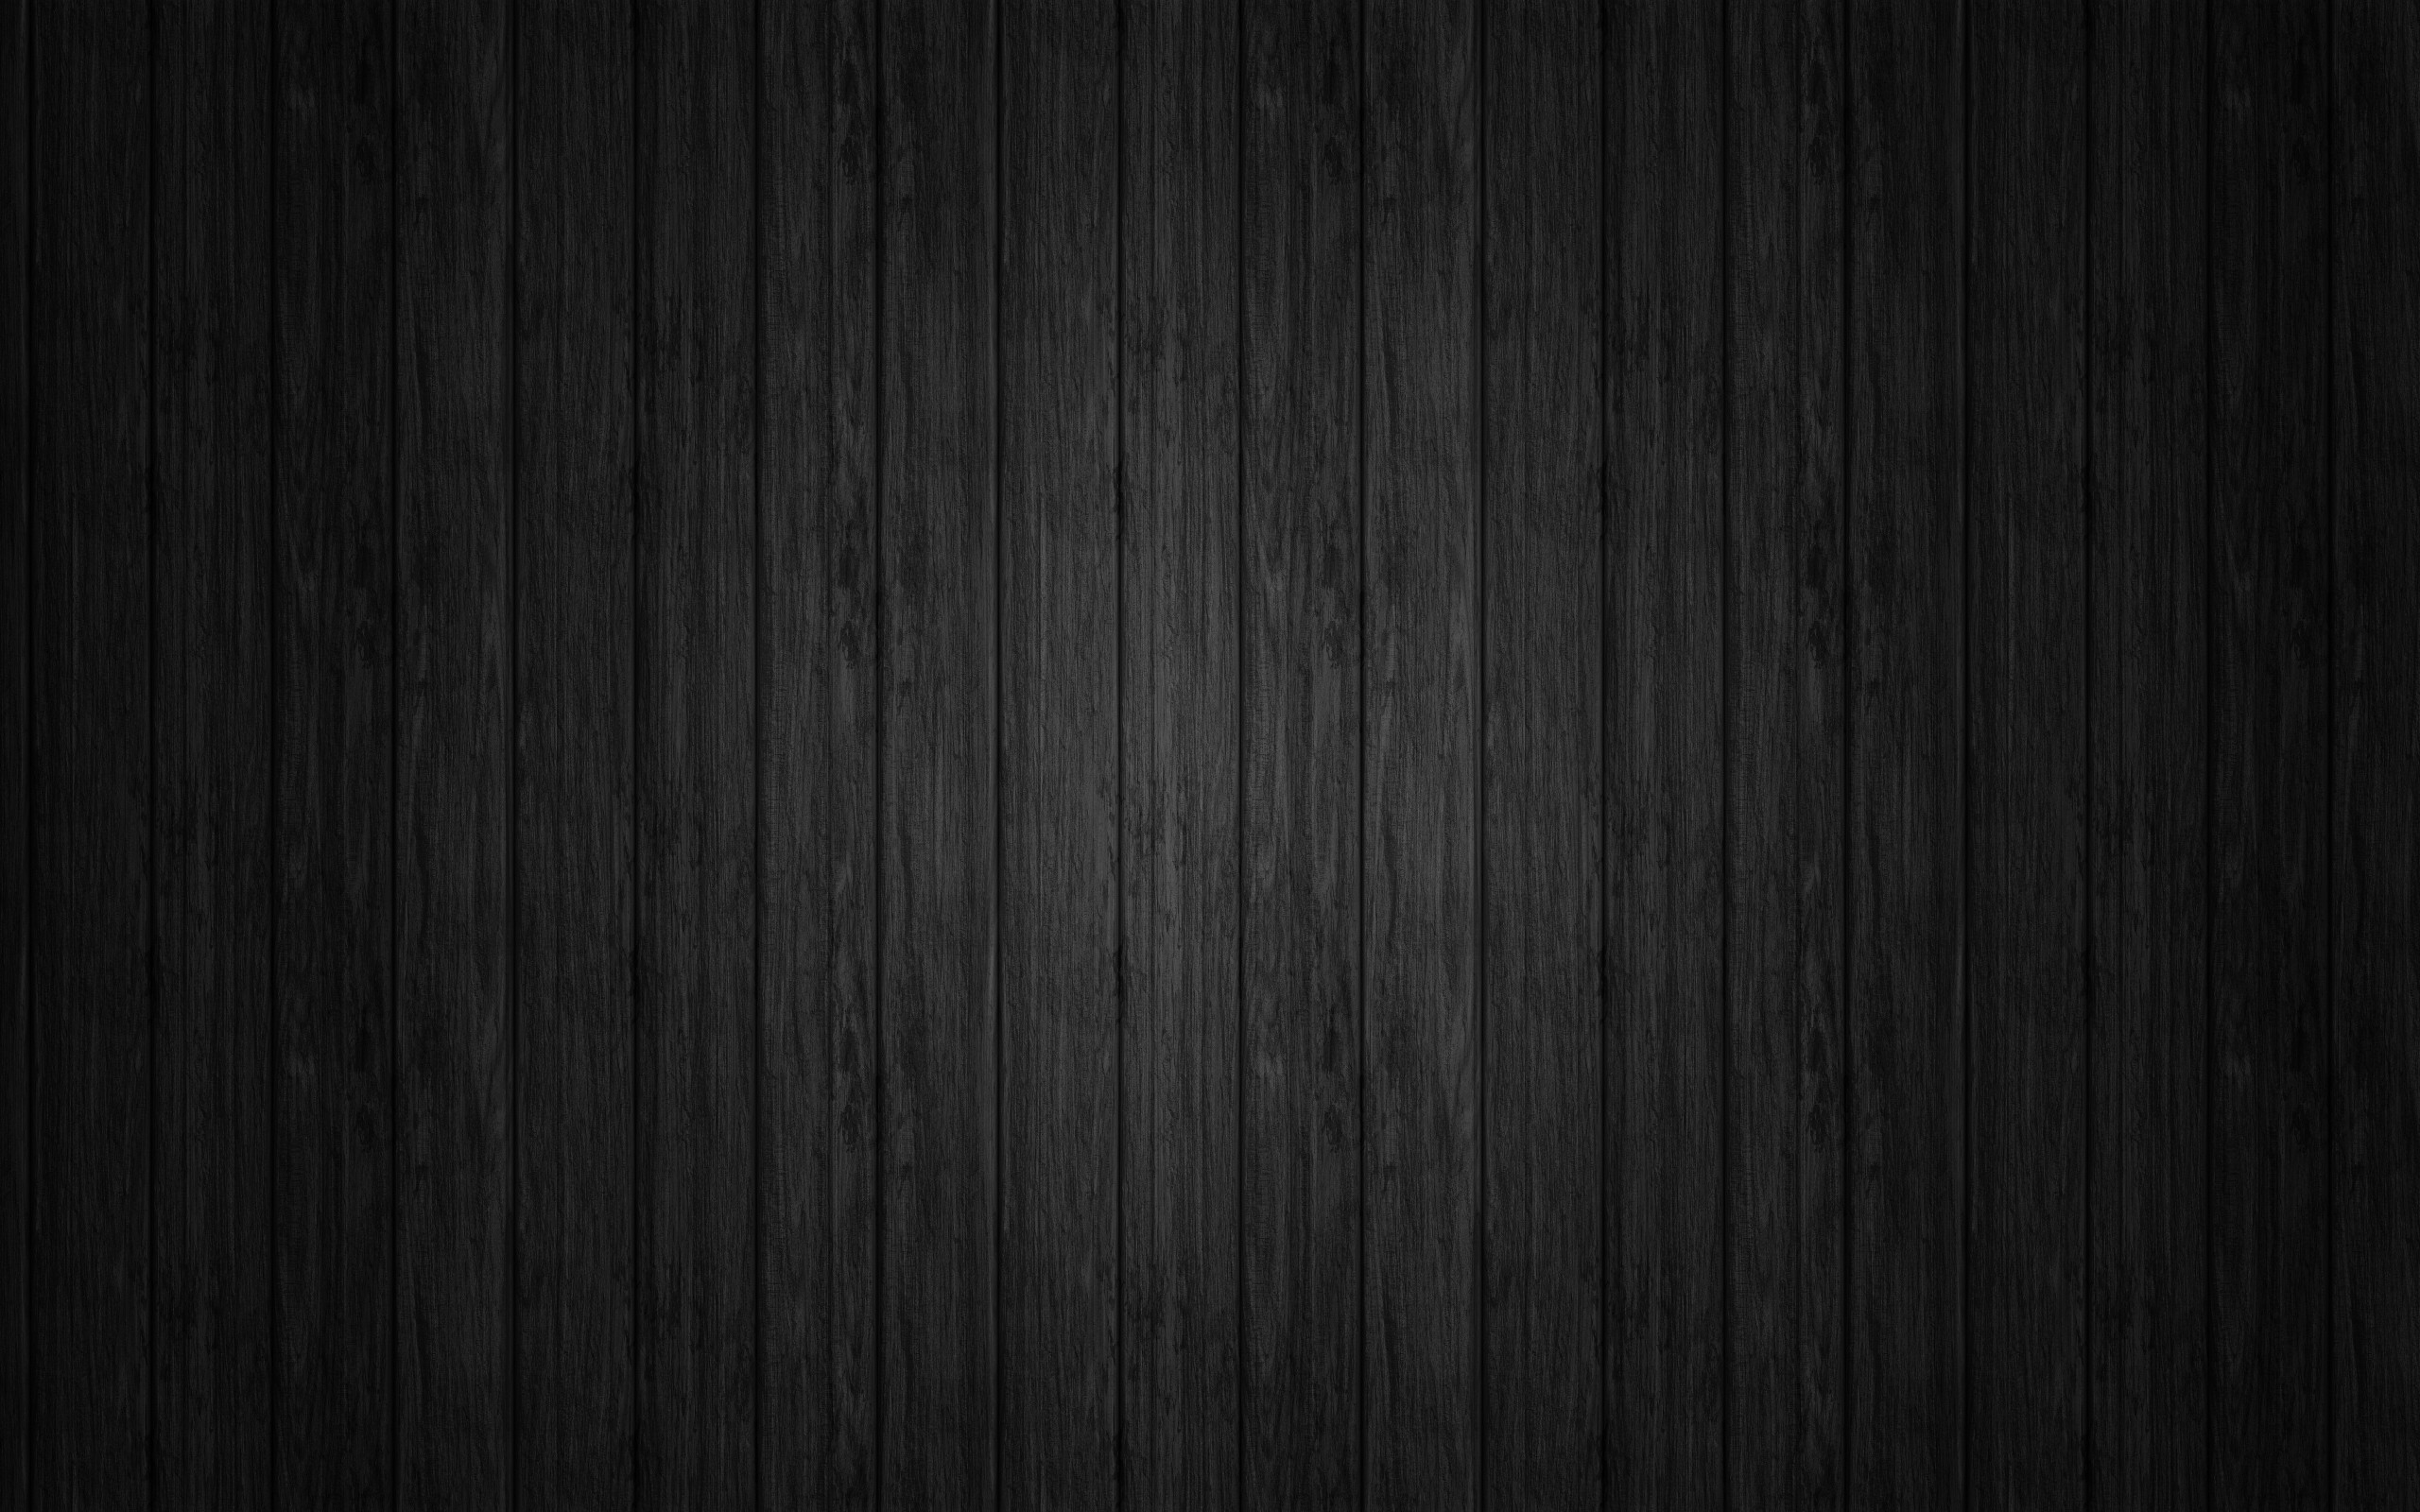 General 2560x1600 wood texture dark planks simple background wooden surface